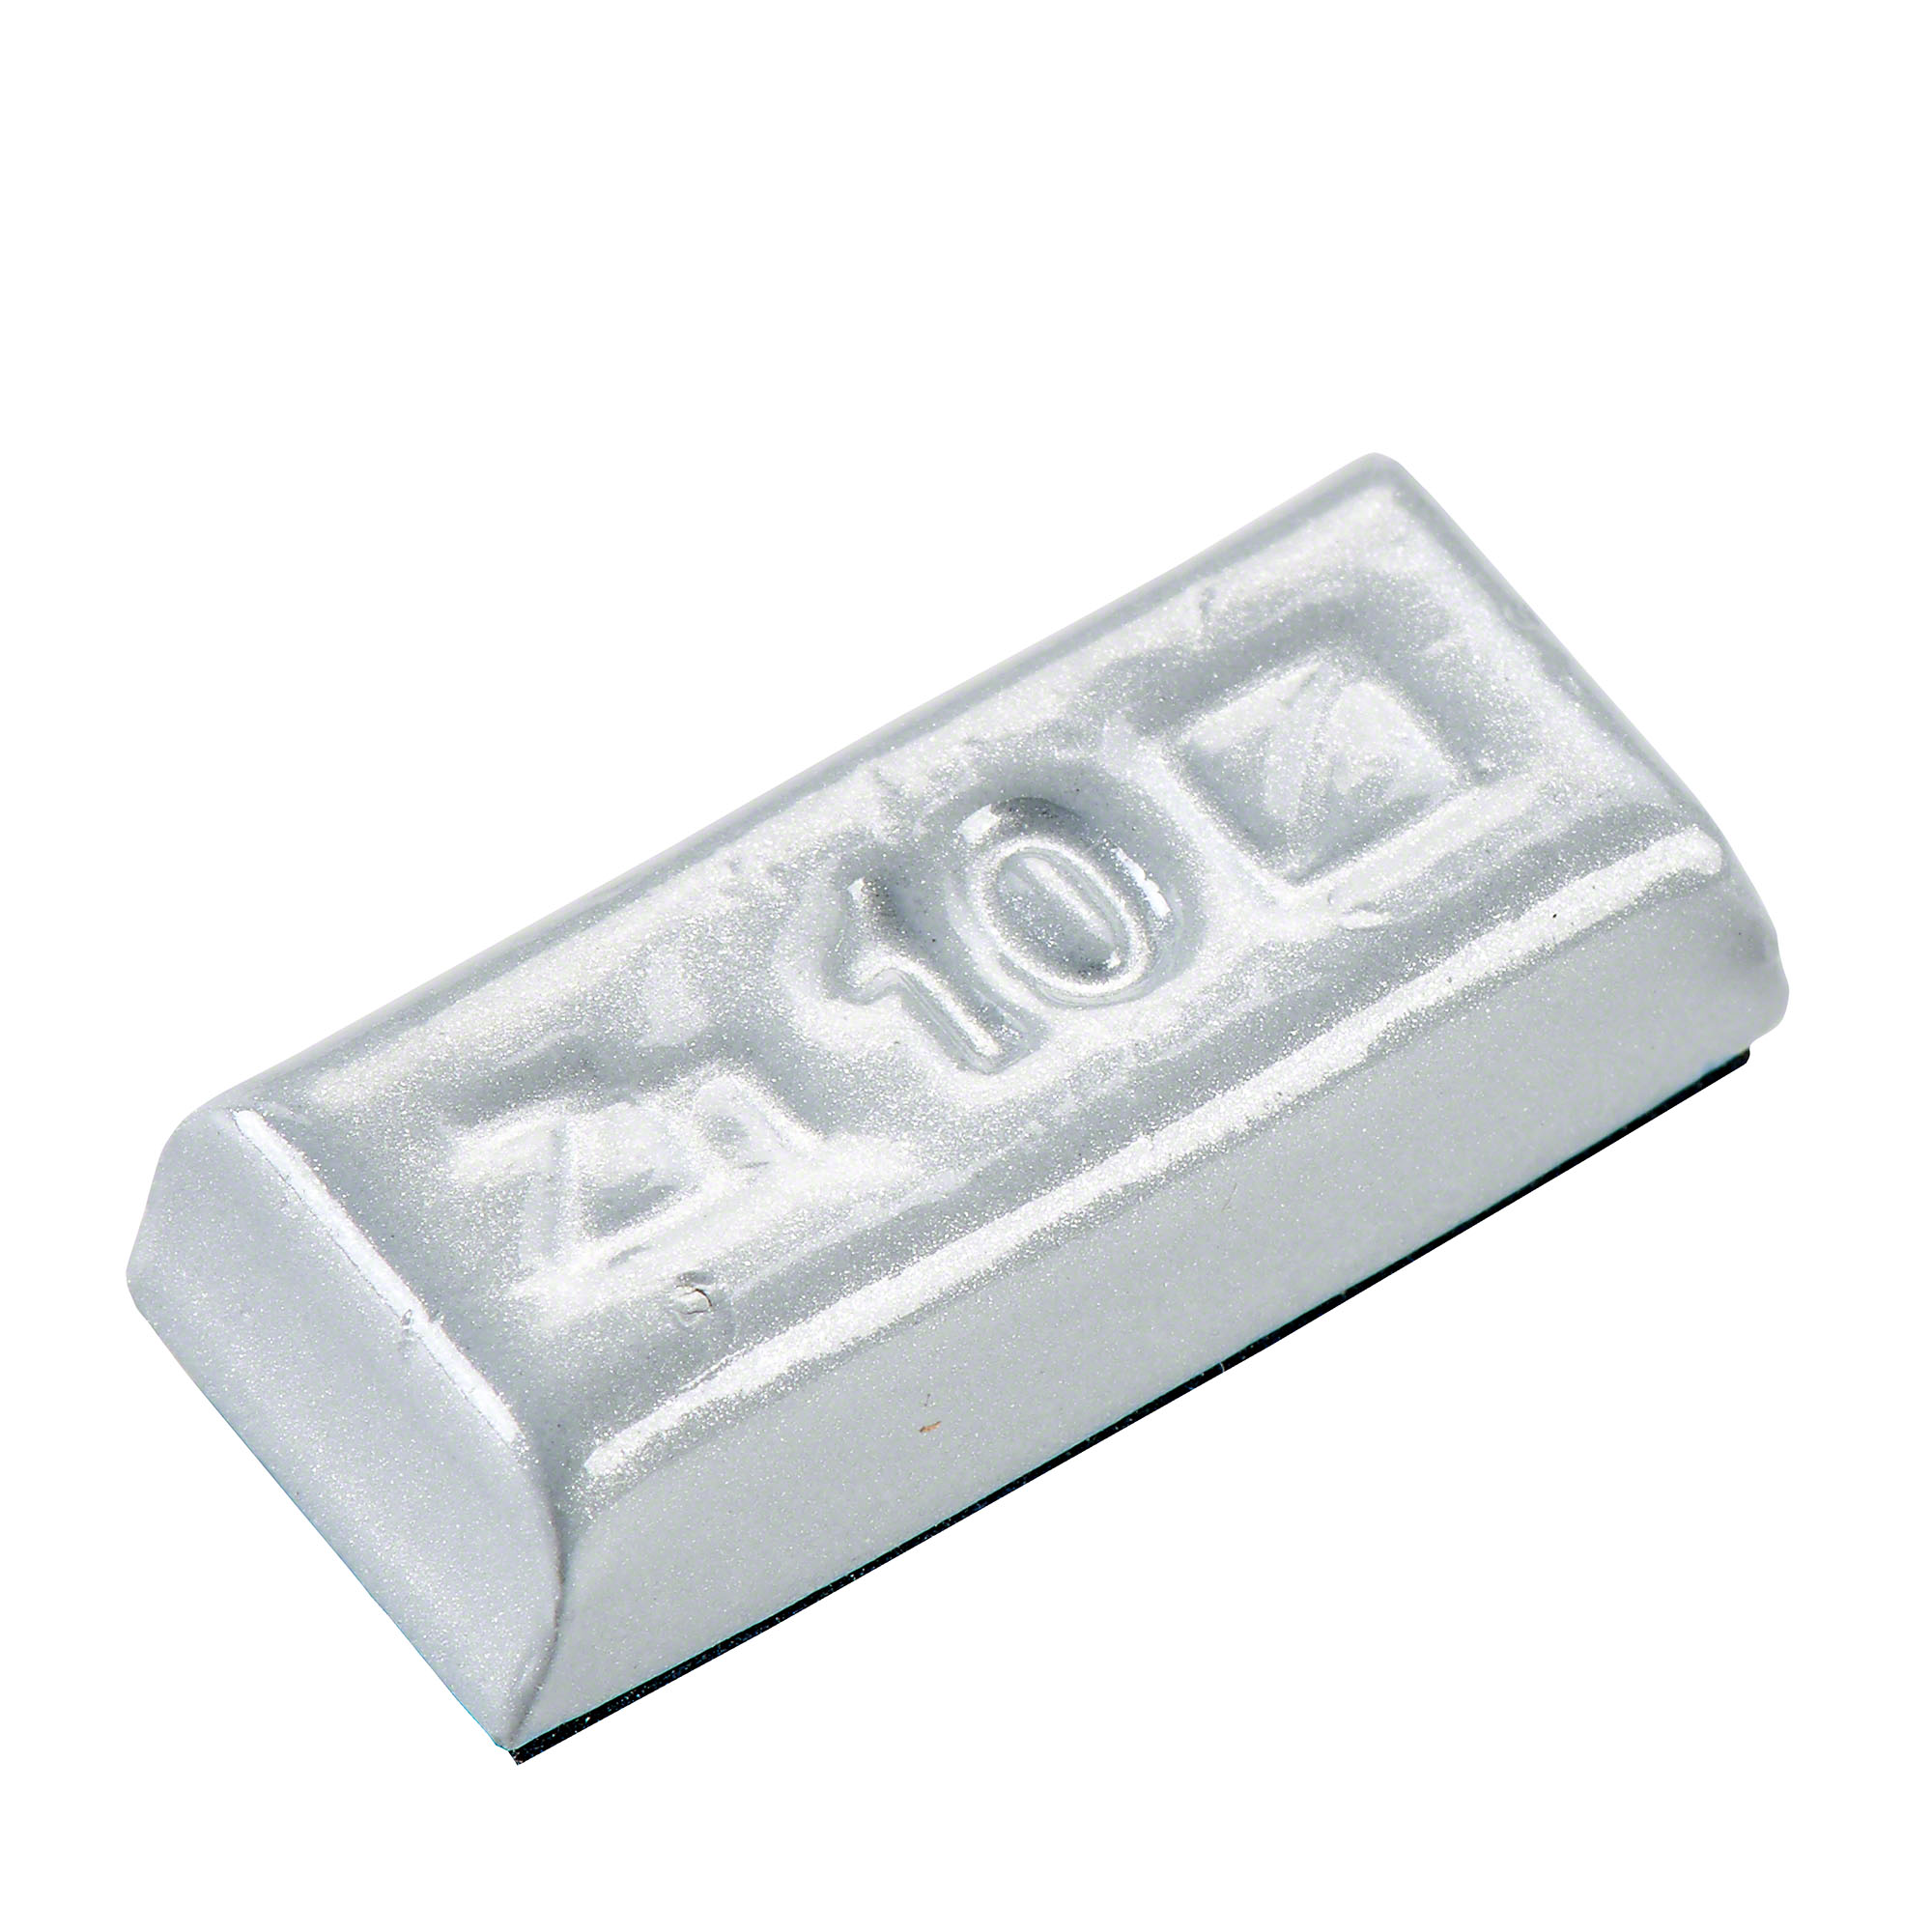 adhesive weight - Typ 799, 10 g, zinc, silver